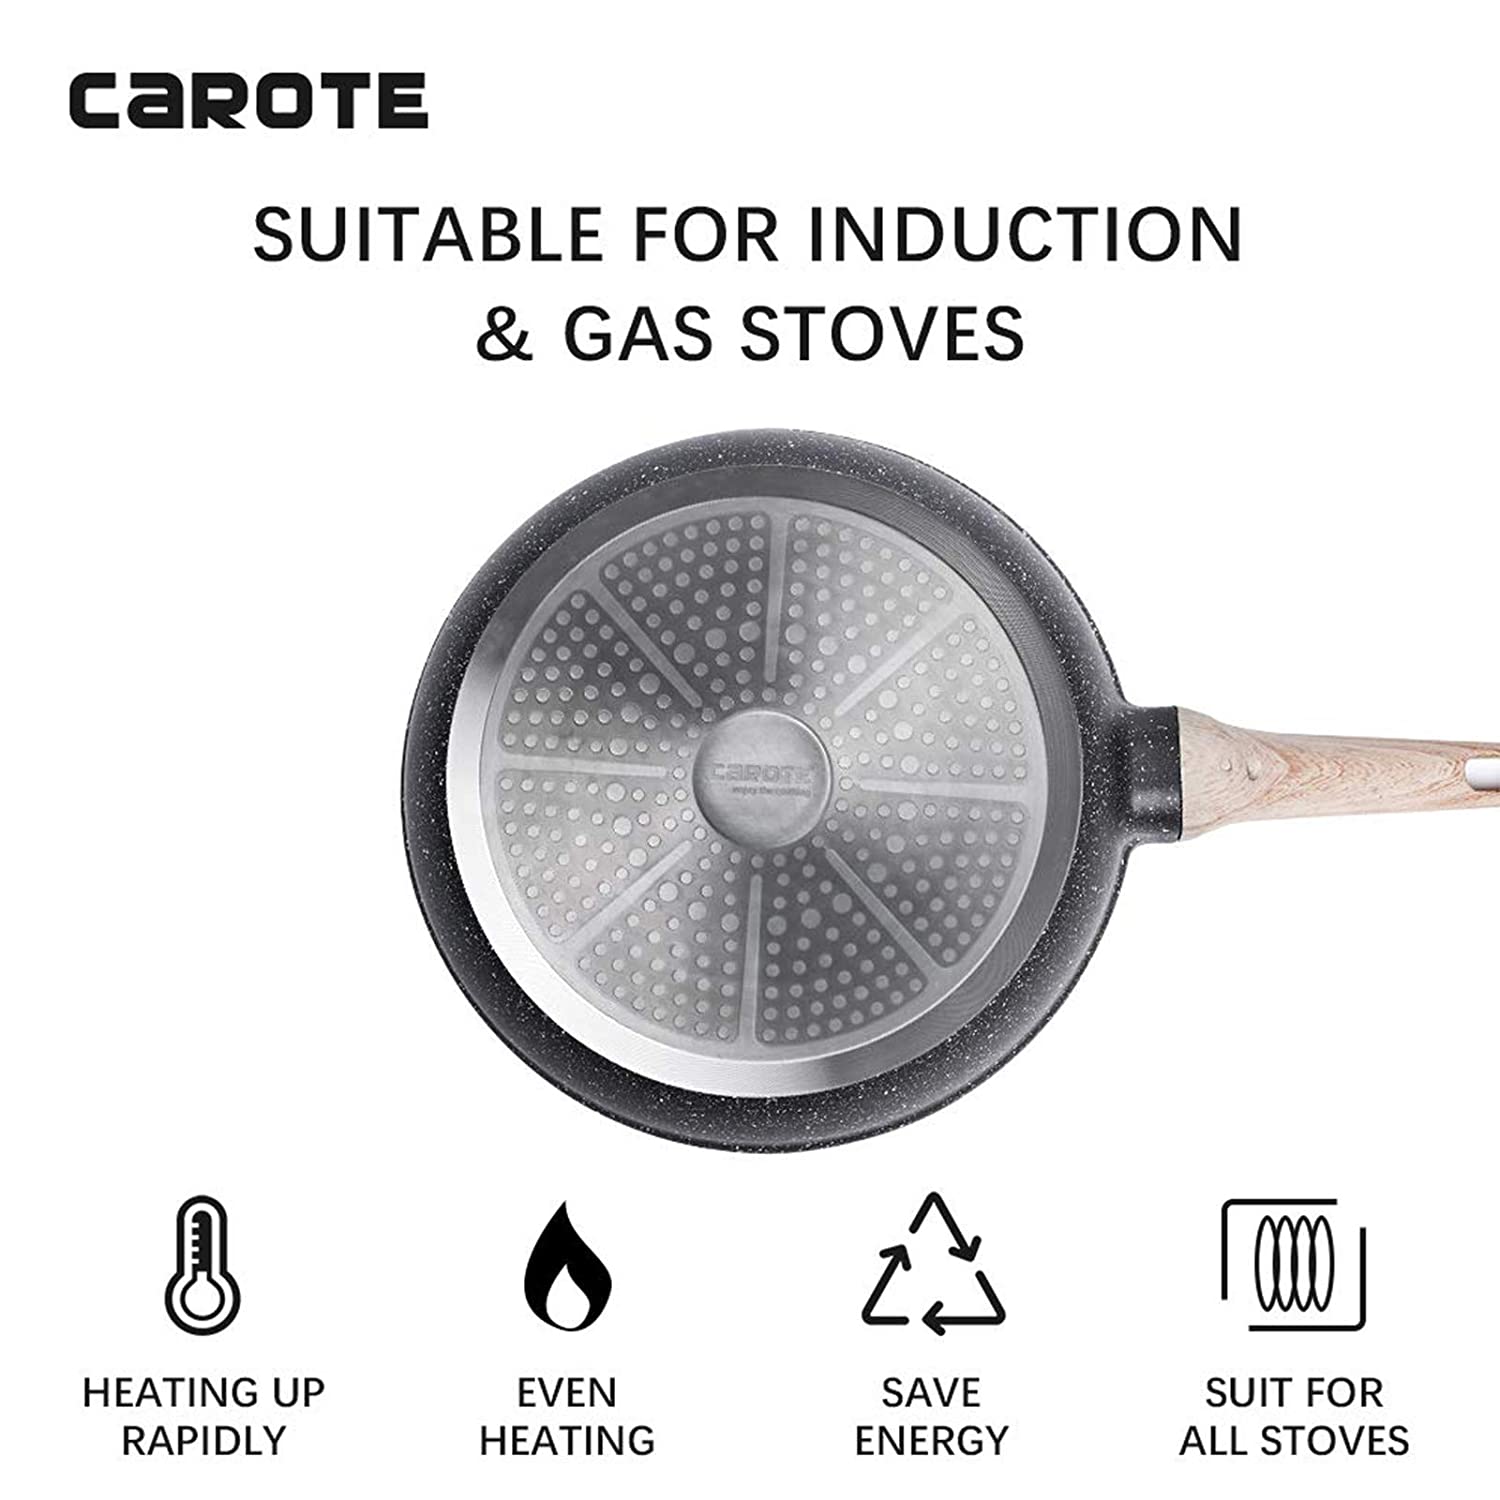 Carote 8.5 Inch Nonstick Frying Pan PFOA Free Non-Stick Stone Coating From Switzerland Skillet Pan with Bakelite Handle Omelette Pan Suitable For All Stove 